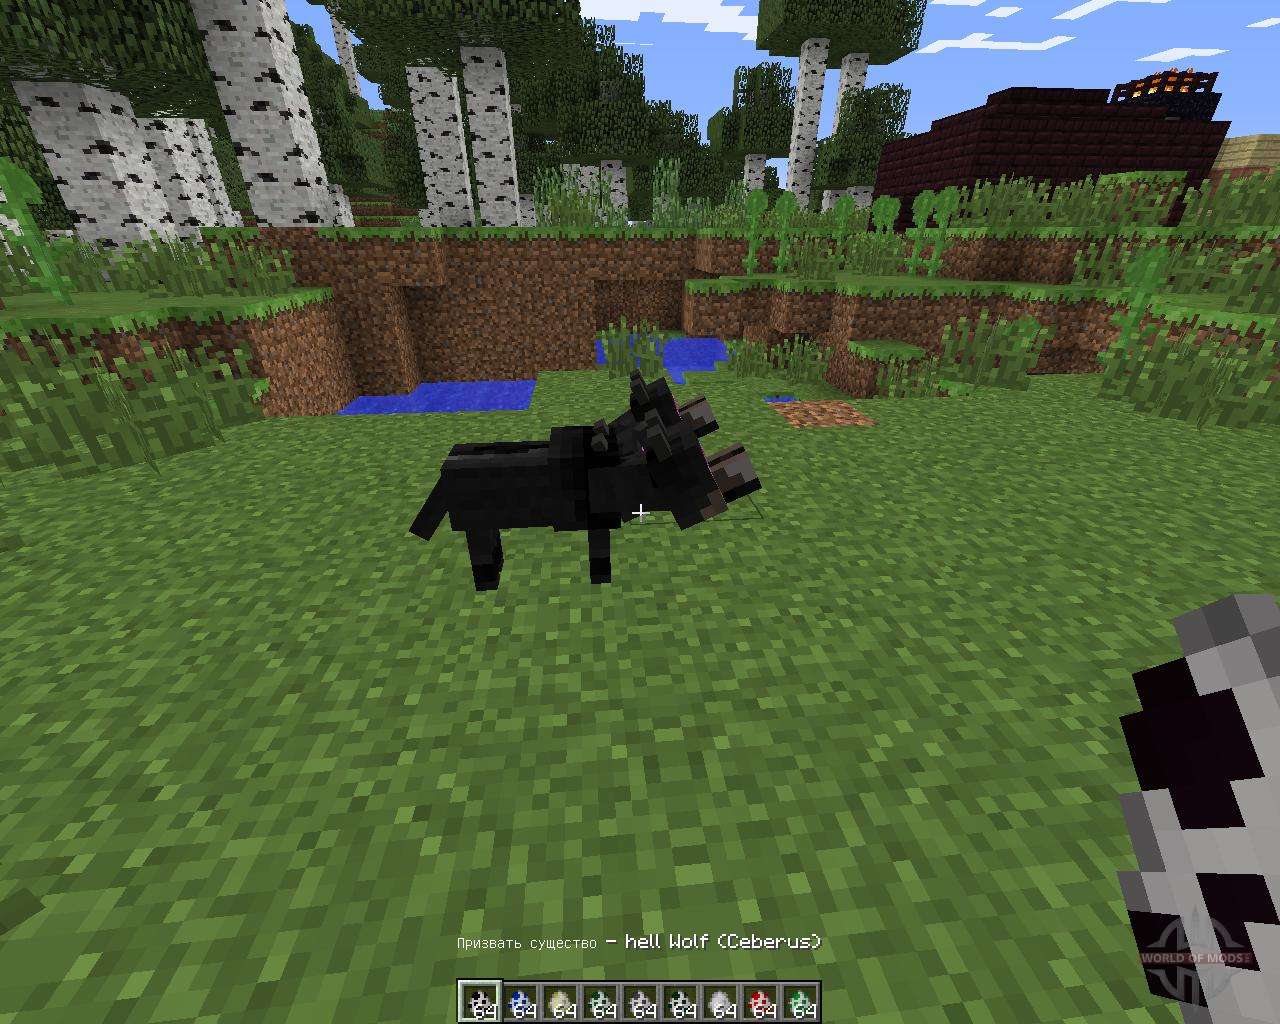 What is the title of this picture ? More Wolves for Minecraft